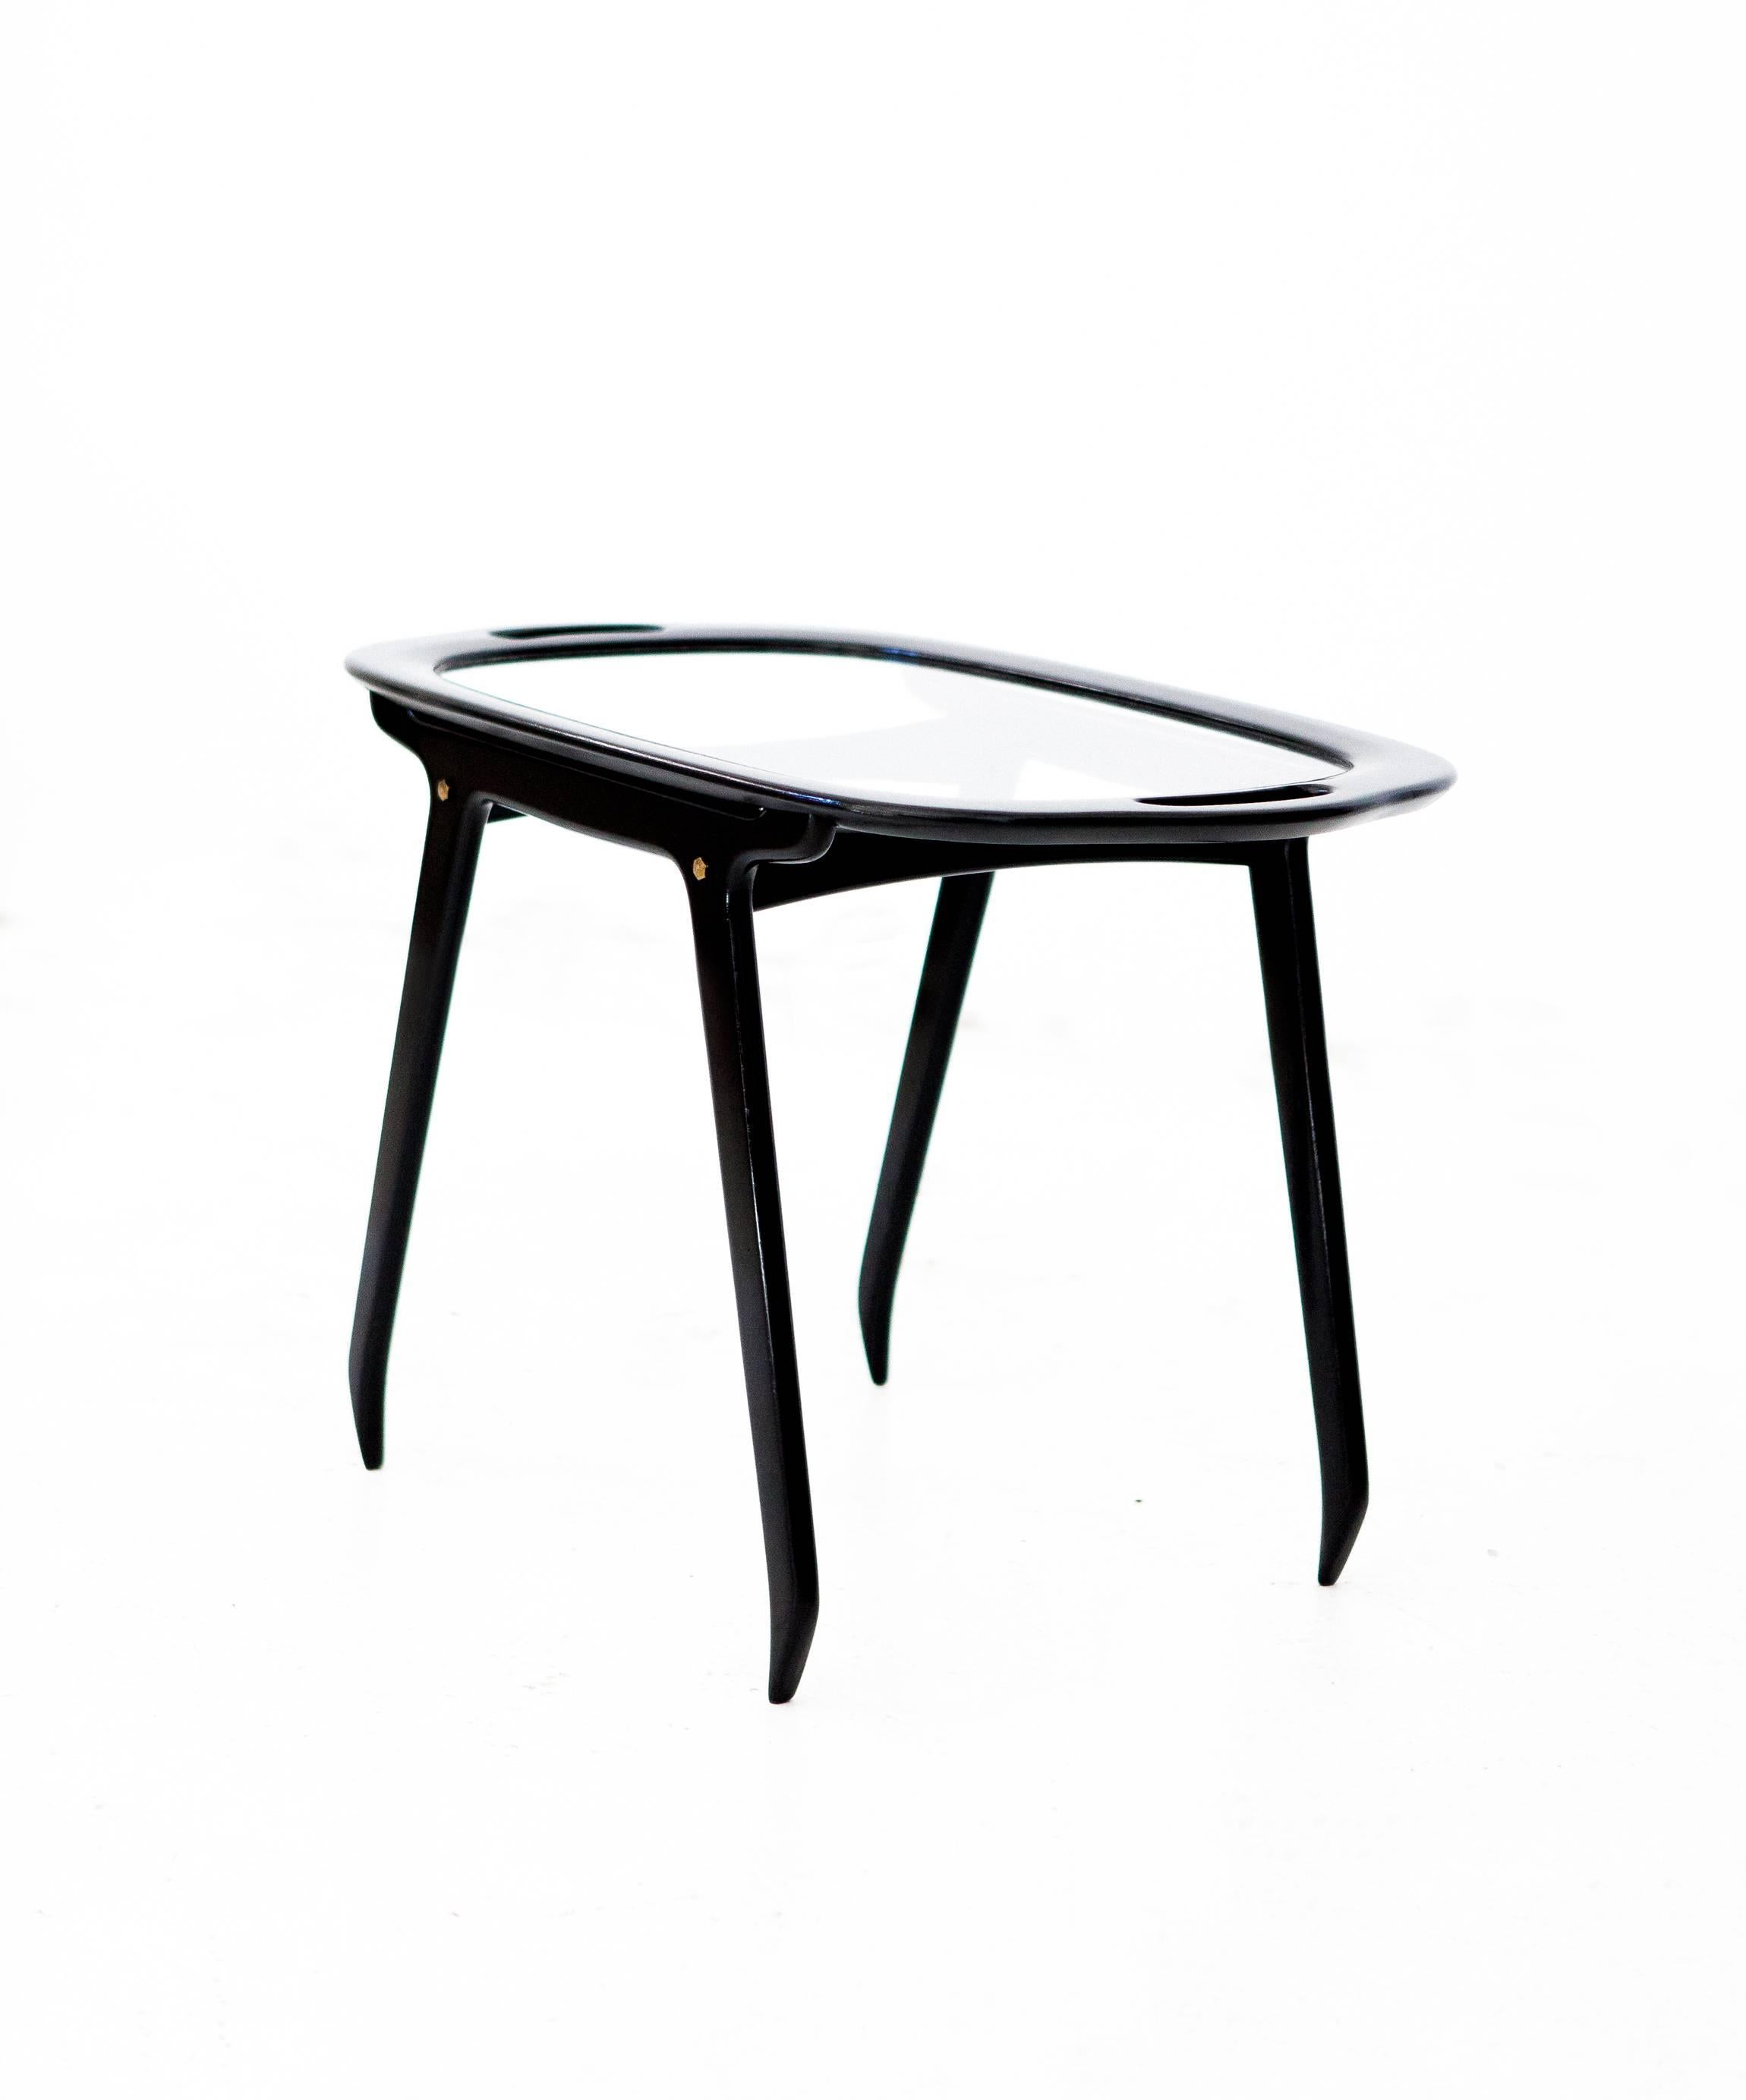 Italian Black Wood and Glass Coffee or Service Table by Cesare Lacca, 1950s (Moderne der Mitte des Jahrhunderts)